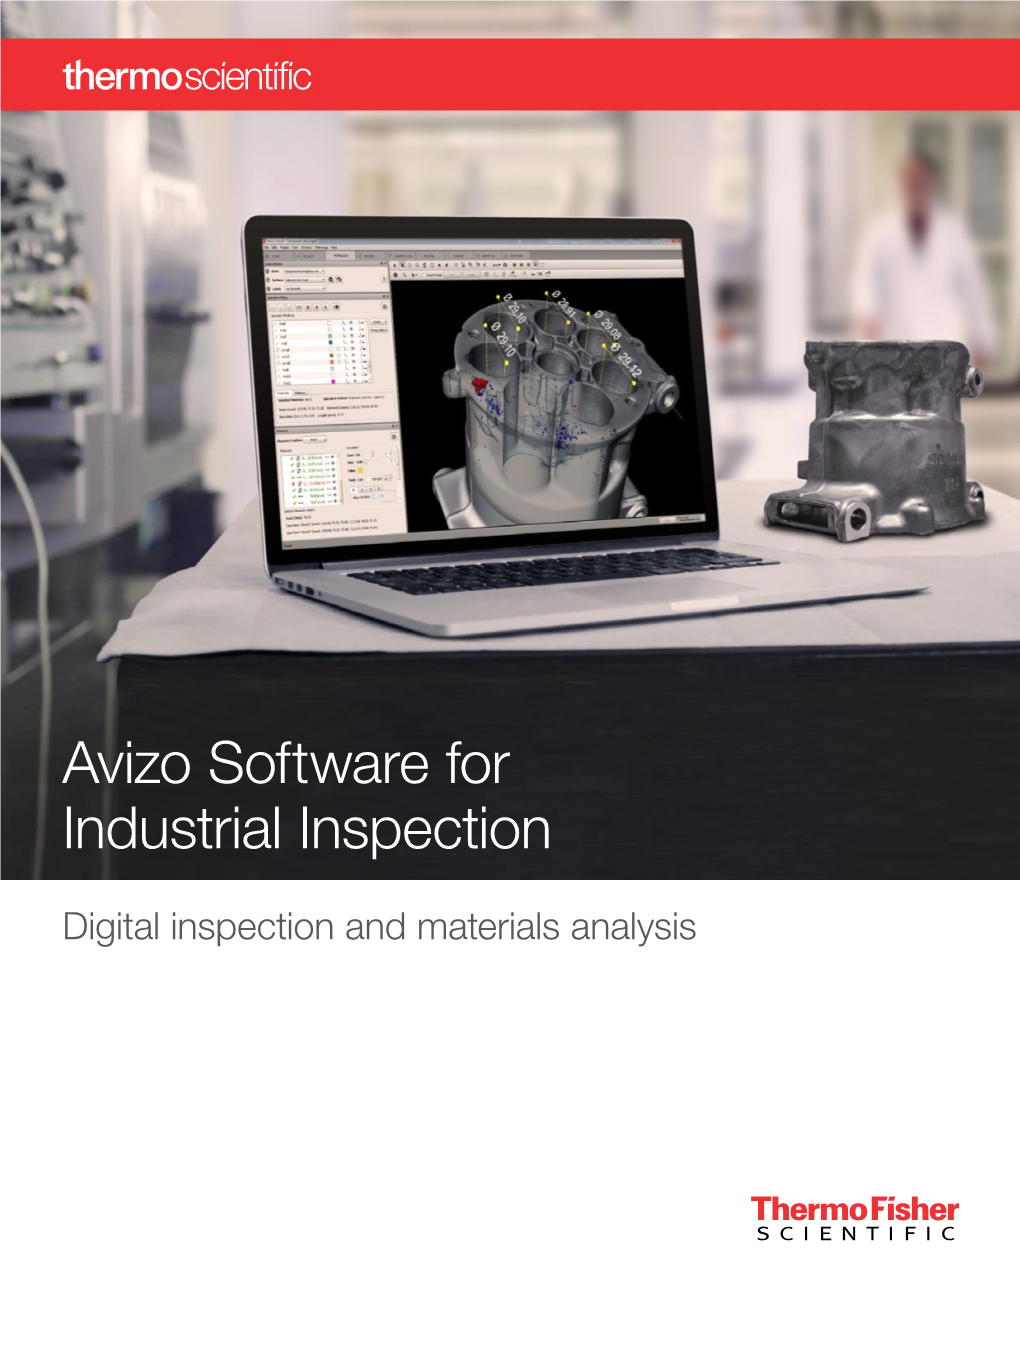 Avizo Software for Industrial Inspection